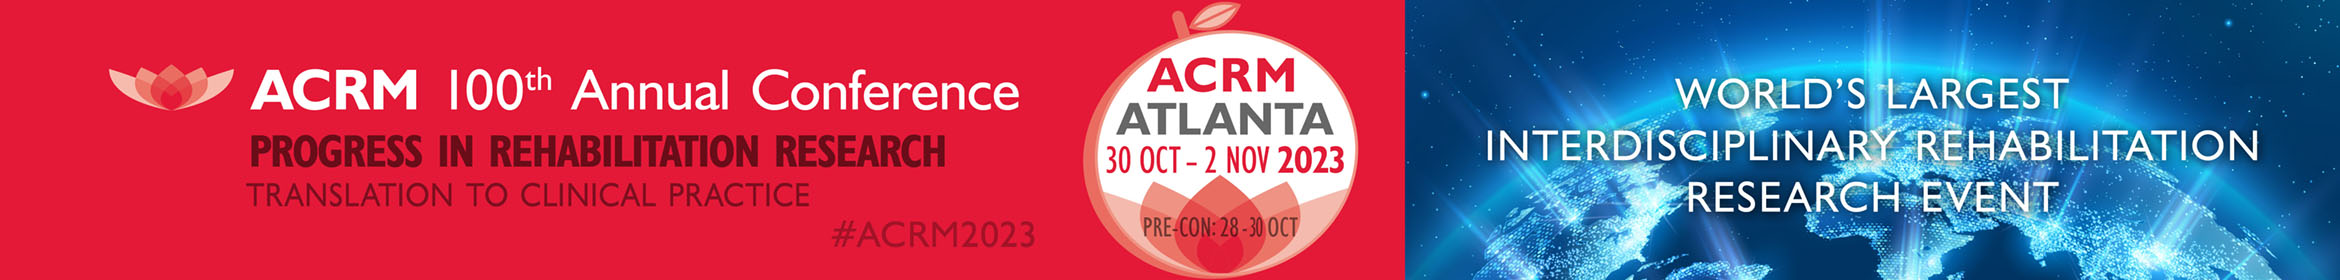 ACRM 100th Annual Conference Main banner